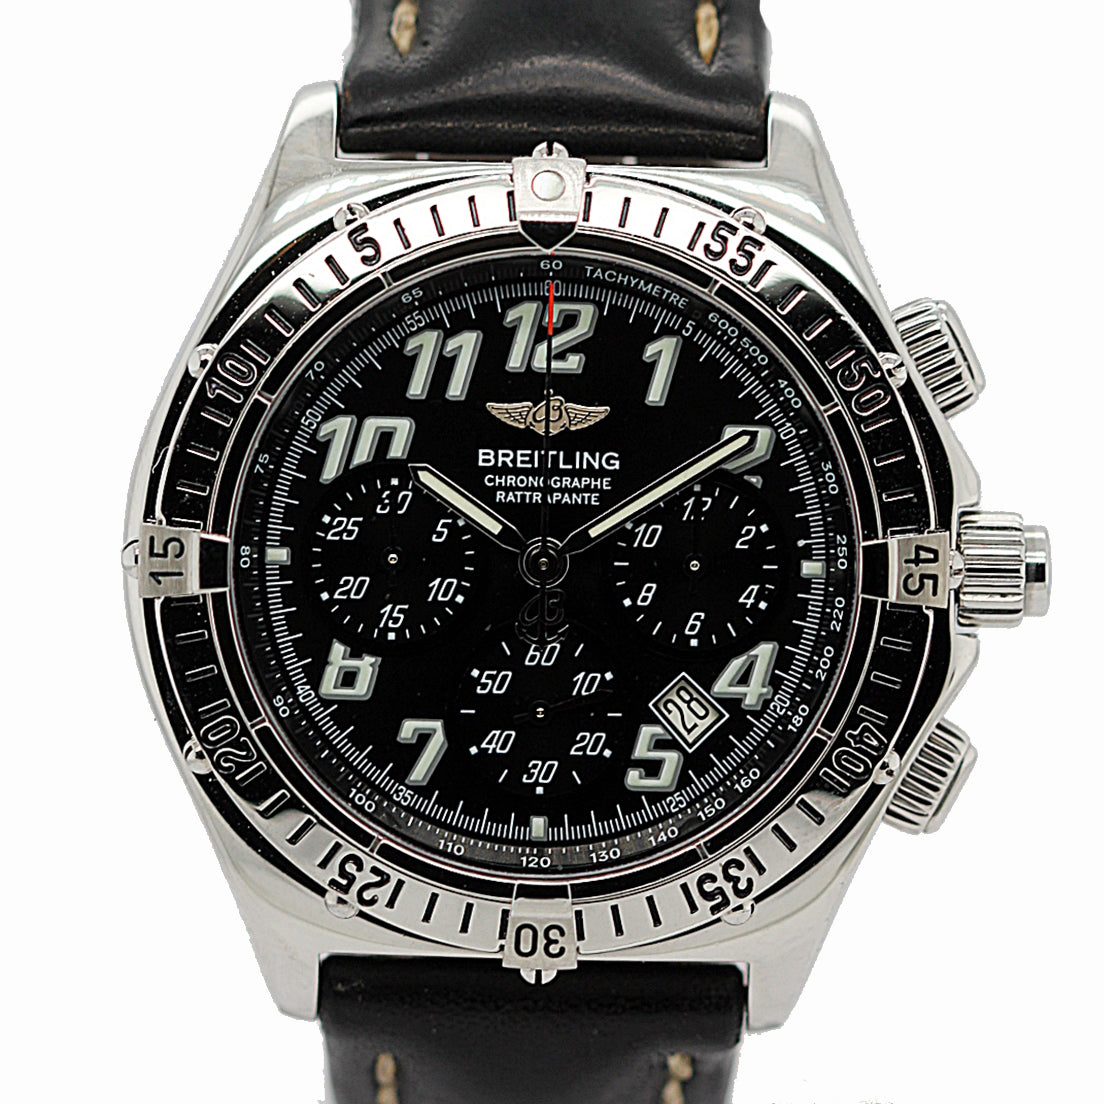 BREITLING<br> Chronoracer Rattrapante